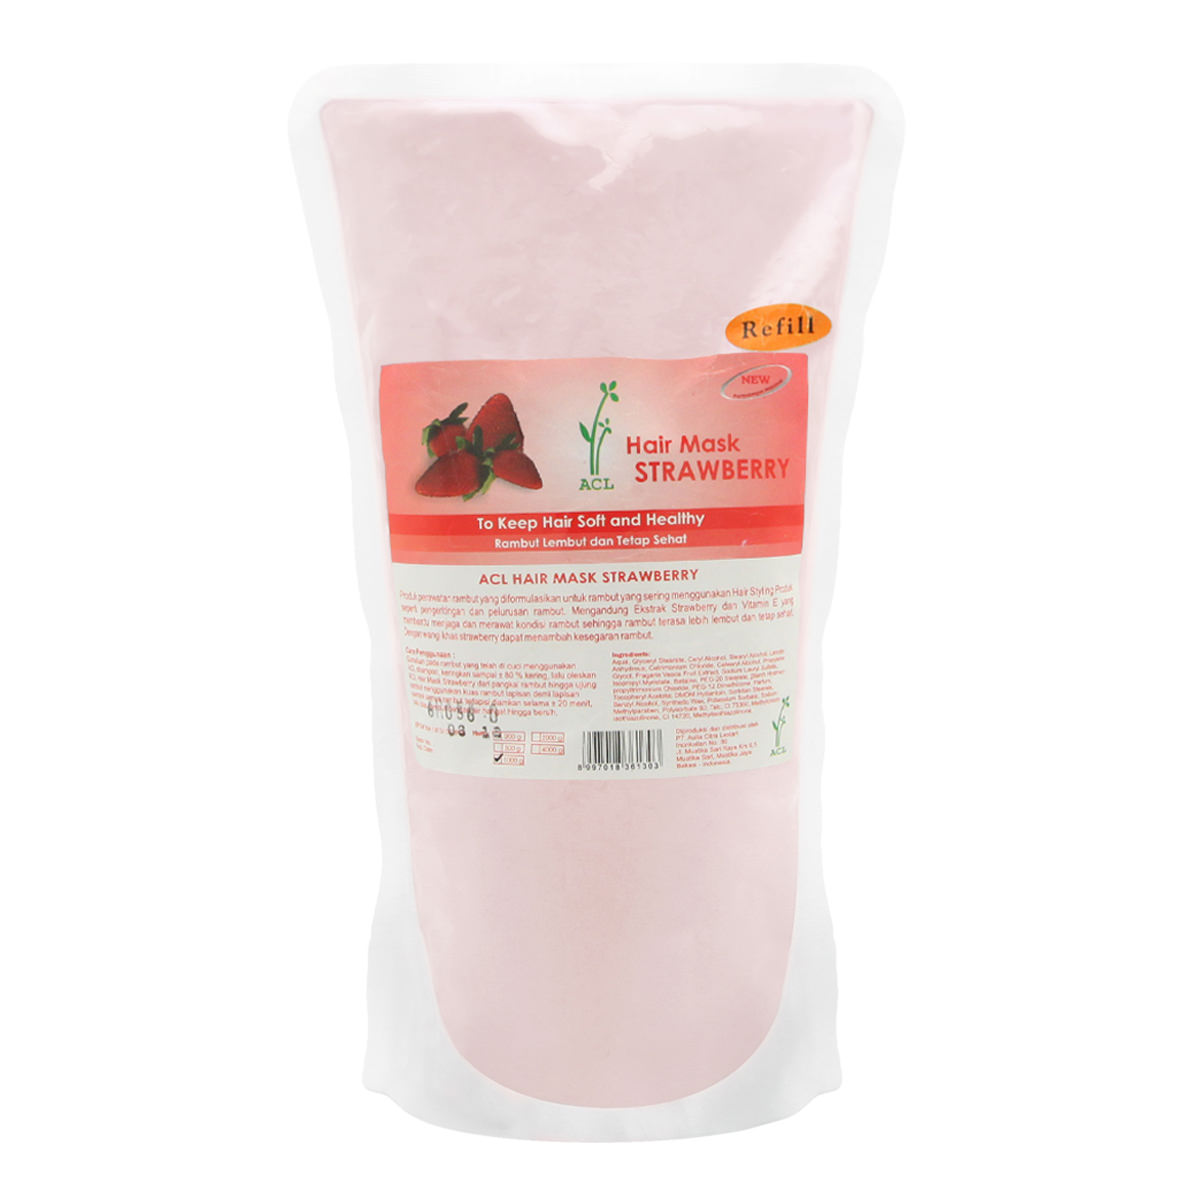 ACL-Hair-Mask-Strawberry-Refill-(1000-g)-edited-sfw(2)